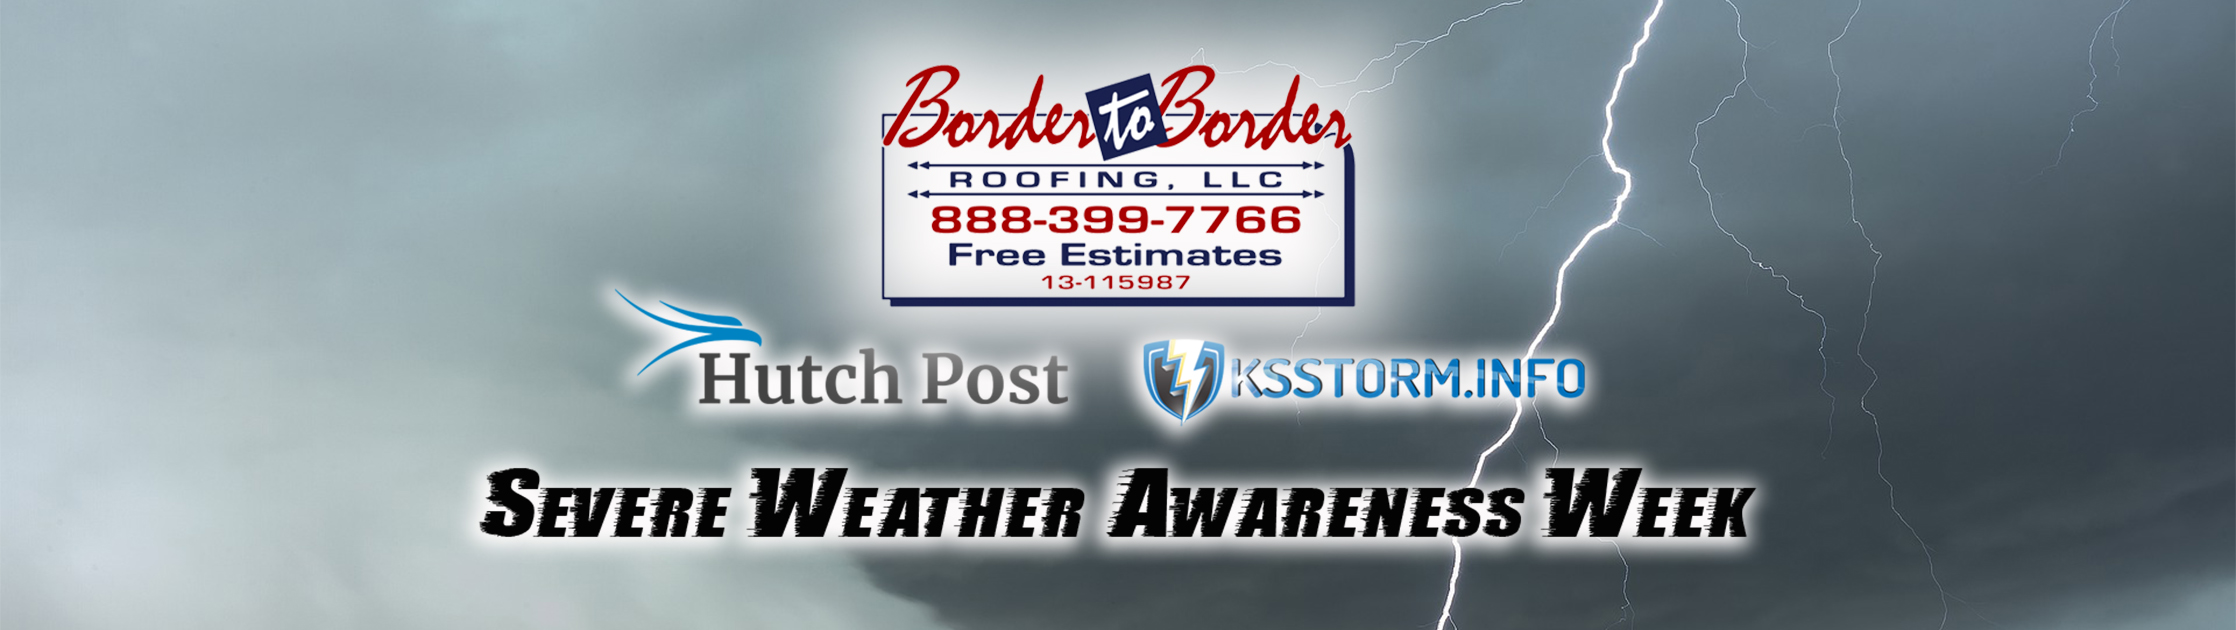 23 severe weather awareness week tuesday story header